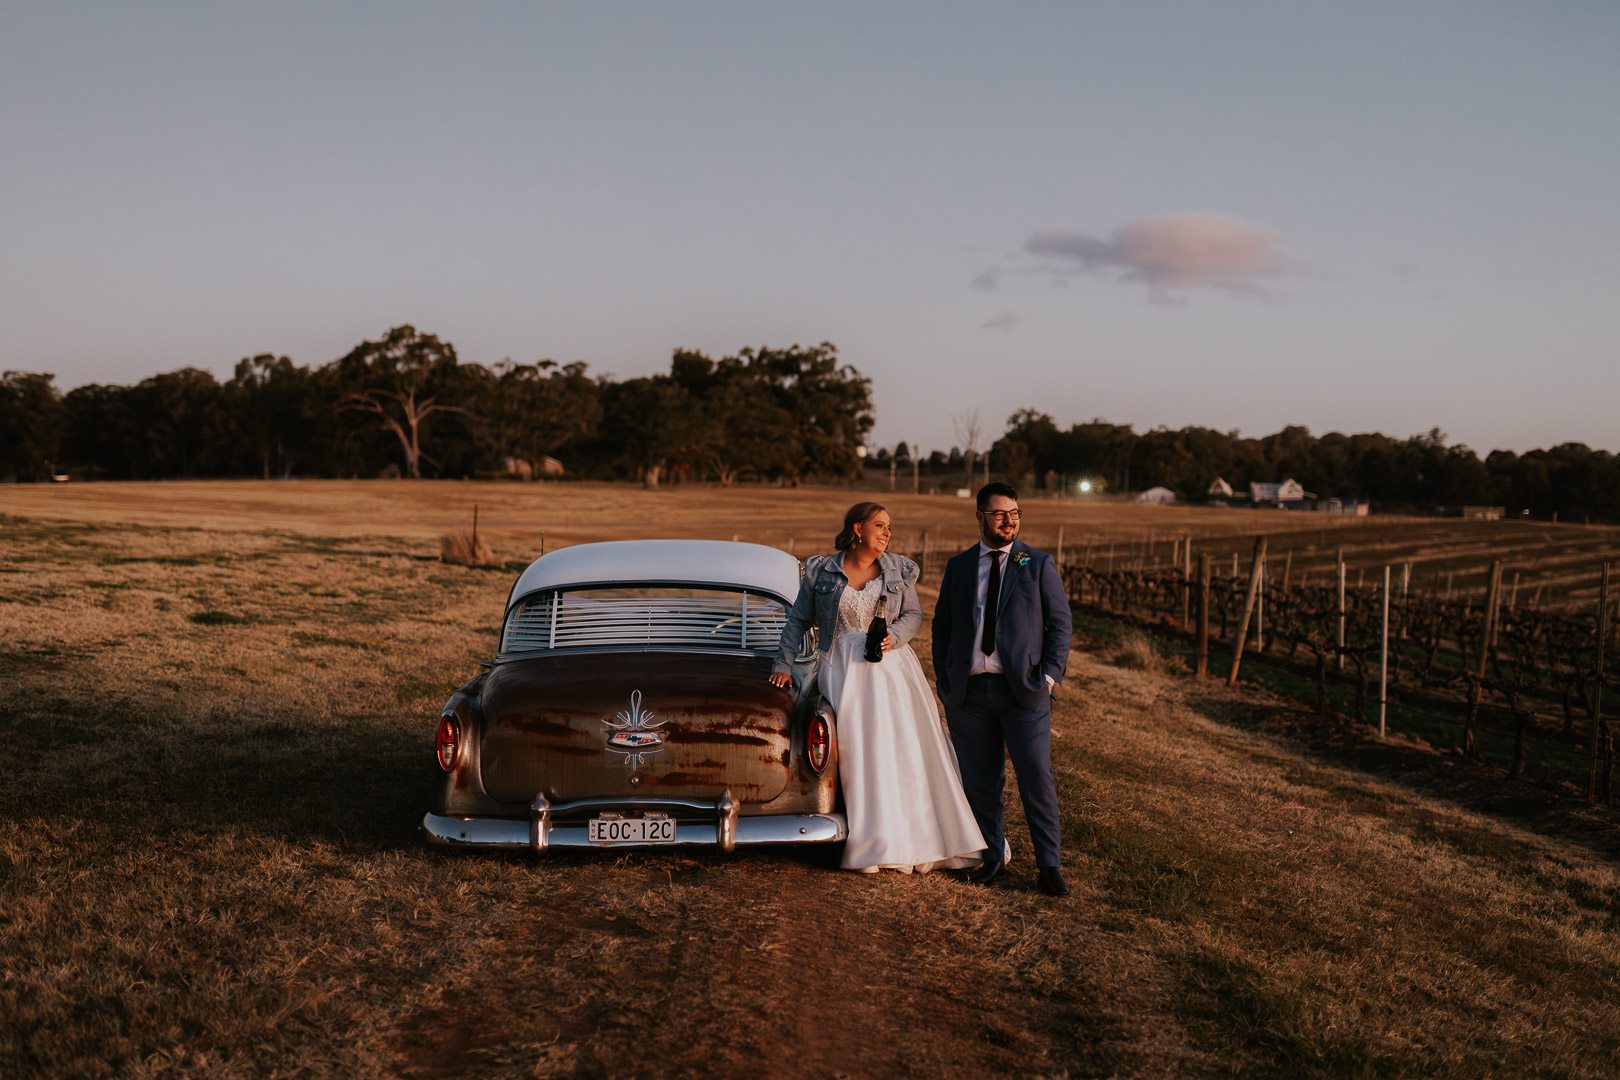 Winter Light at a wedding at Bimbadgen Palmers Lane. A couple stand beside a classic rusty american Chevrolet car. The image is warm, and they look camera right towards the setting sun as they are bathed in beautiful natural light